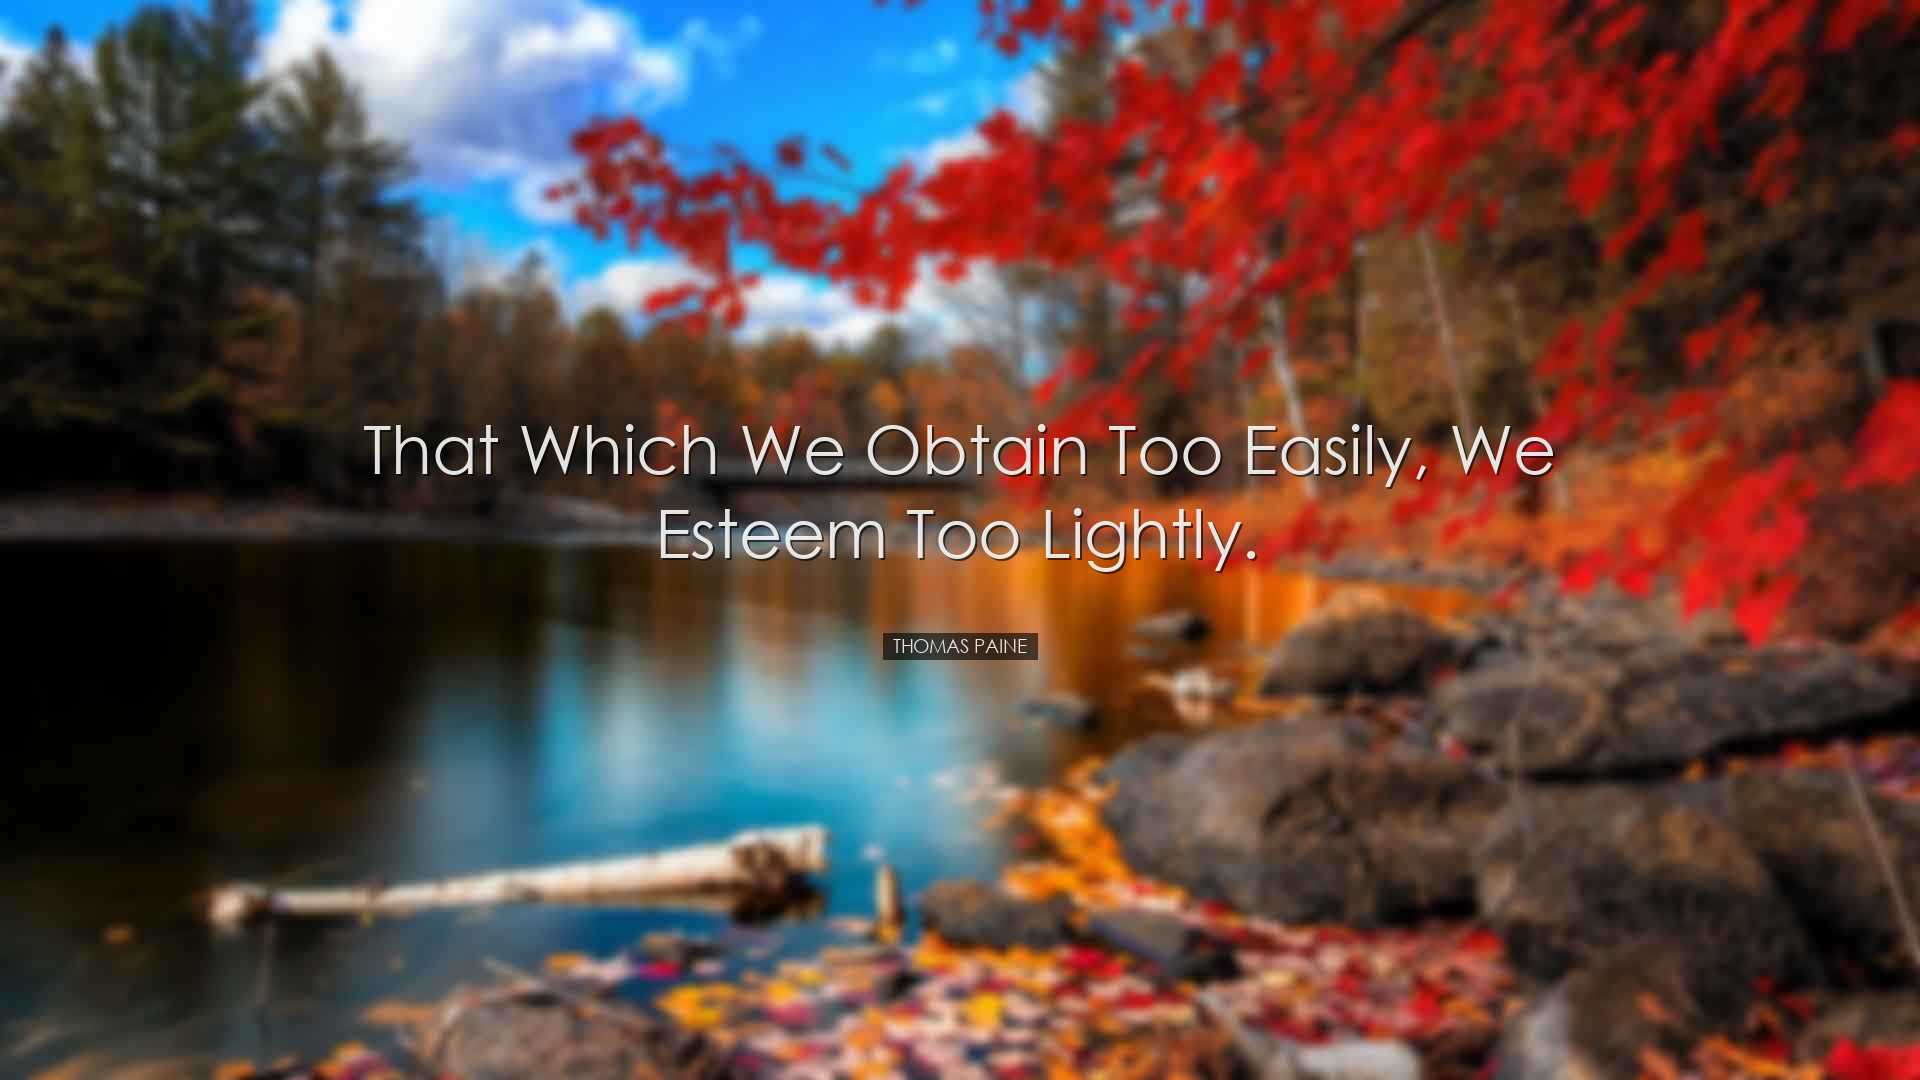 That which we obtain too easily, we esteem too lightly. - Thomas P